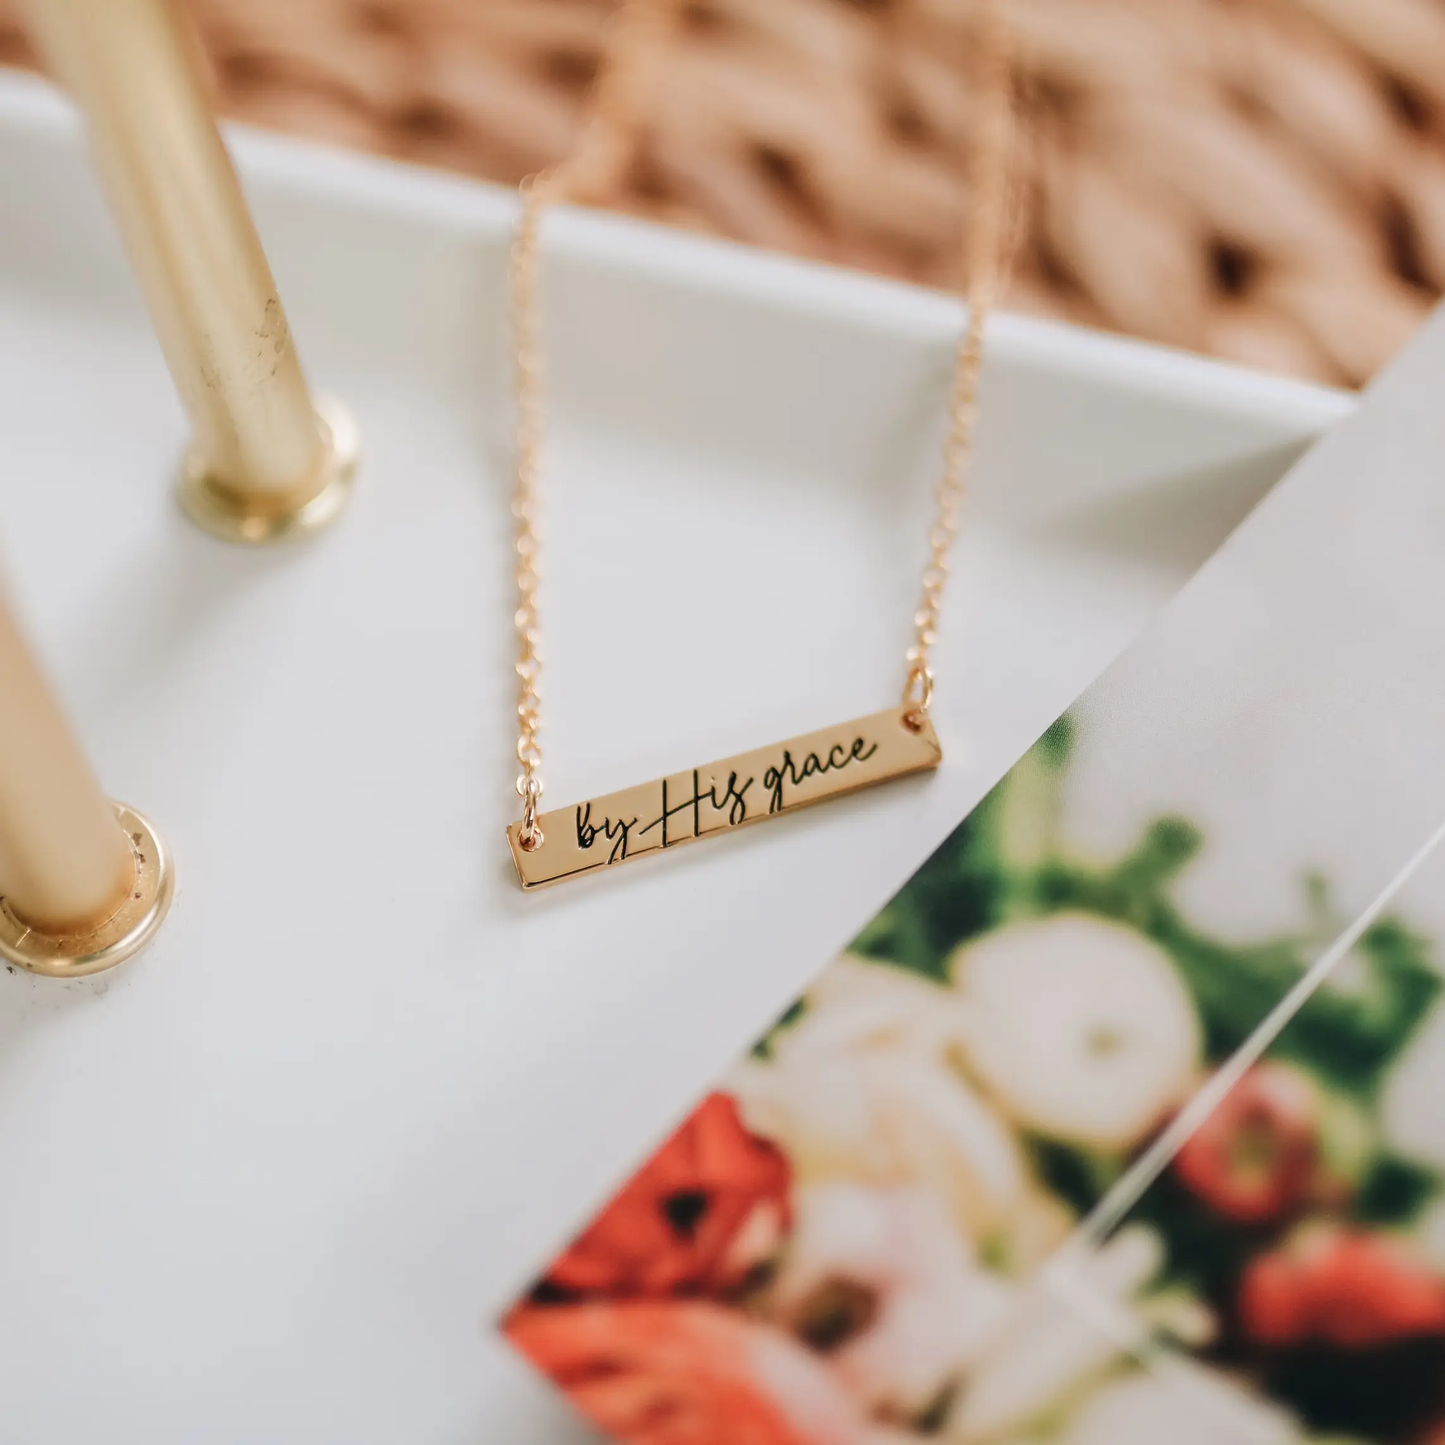 "By His Grace" Necklace